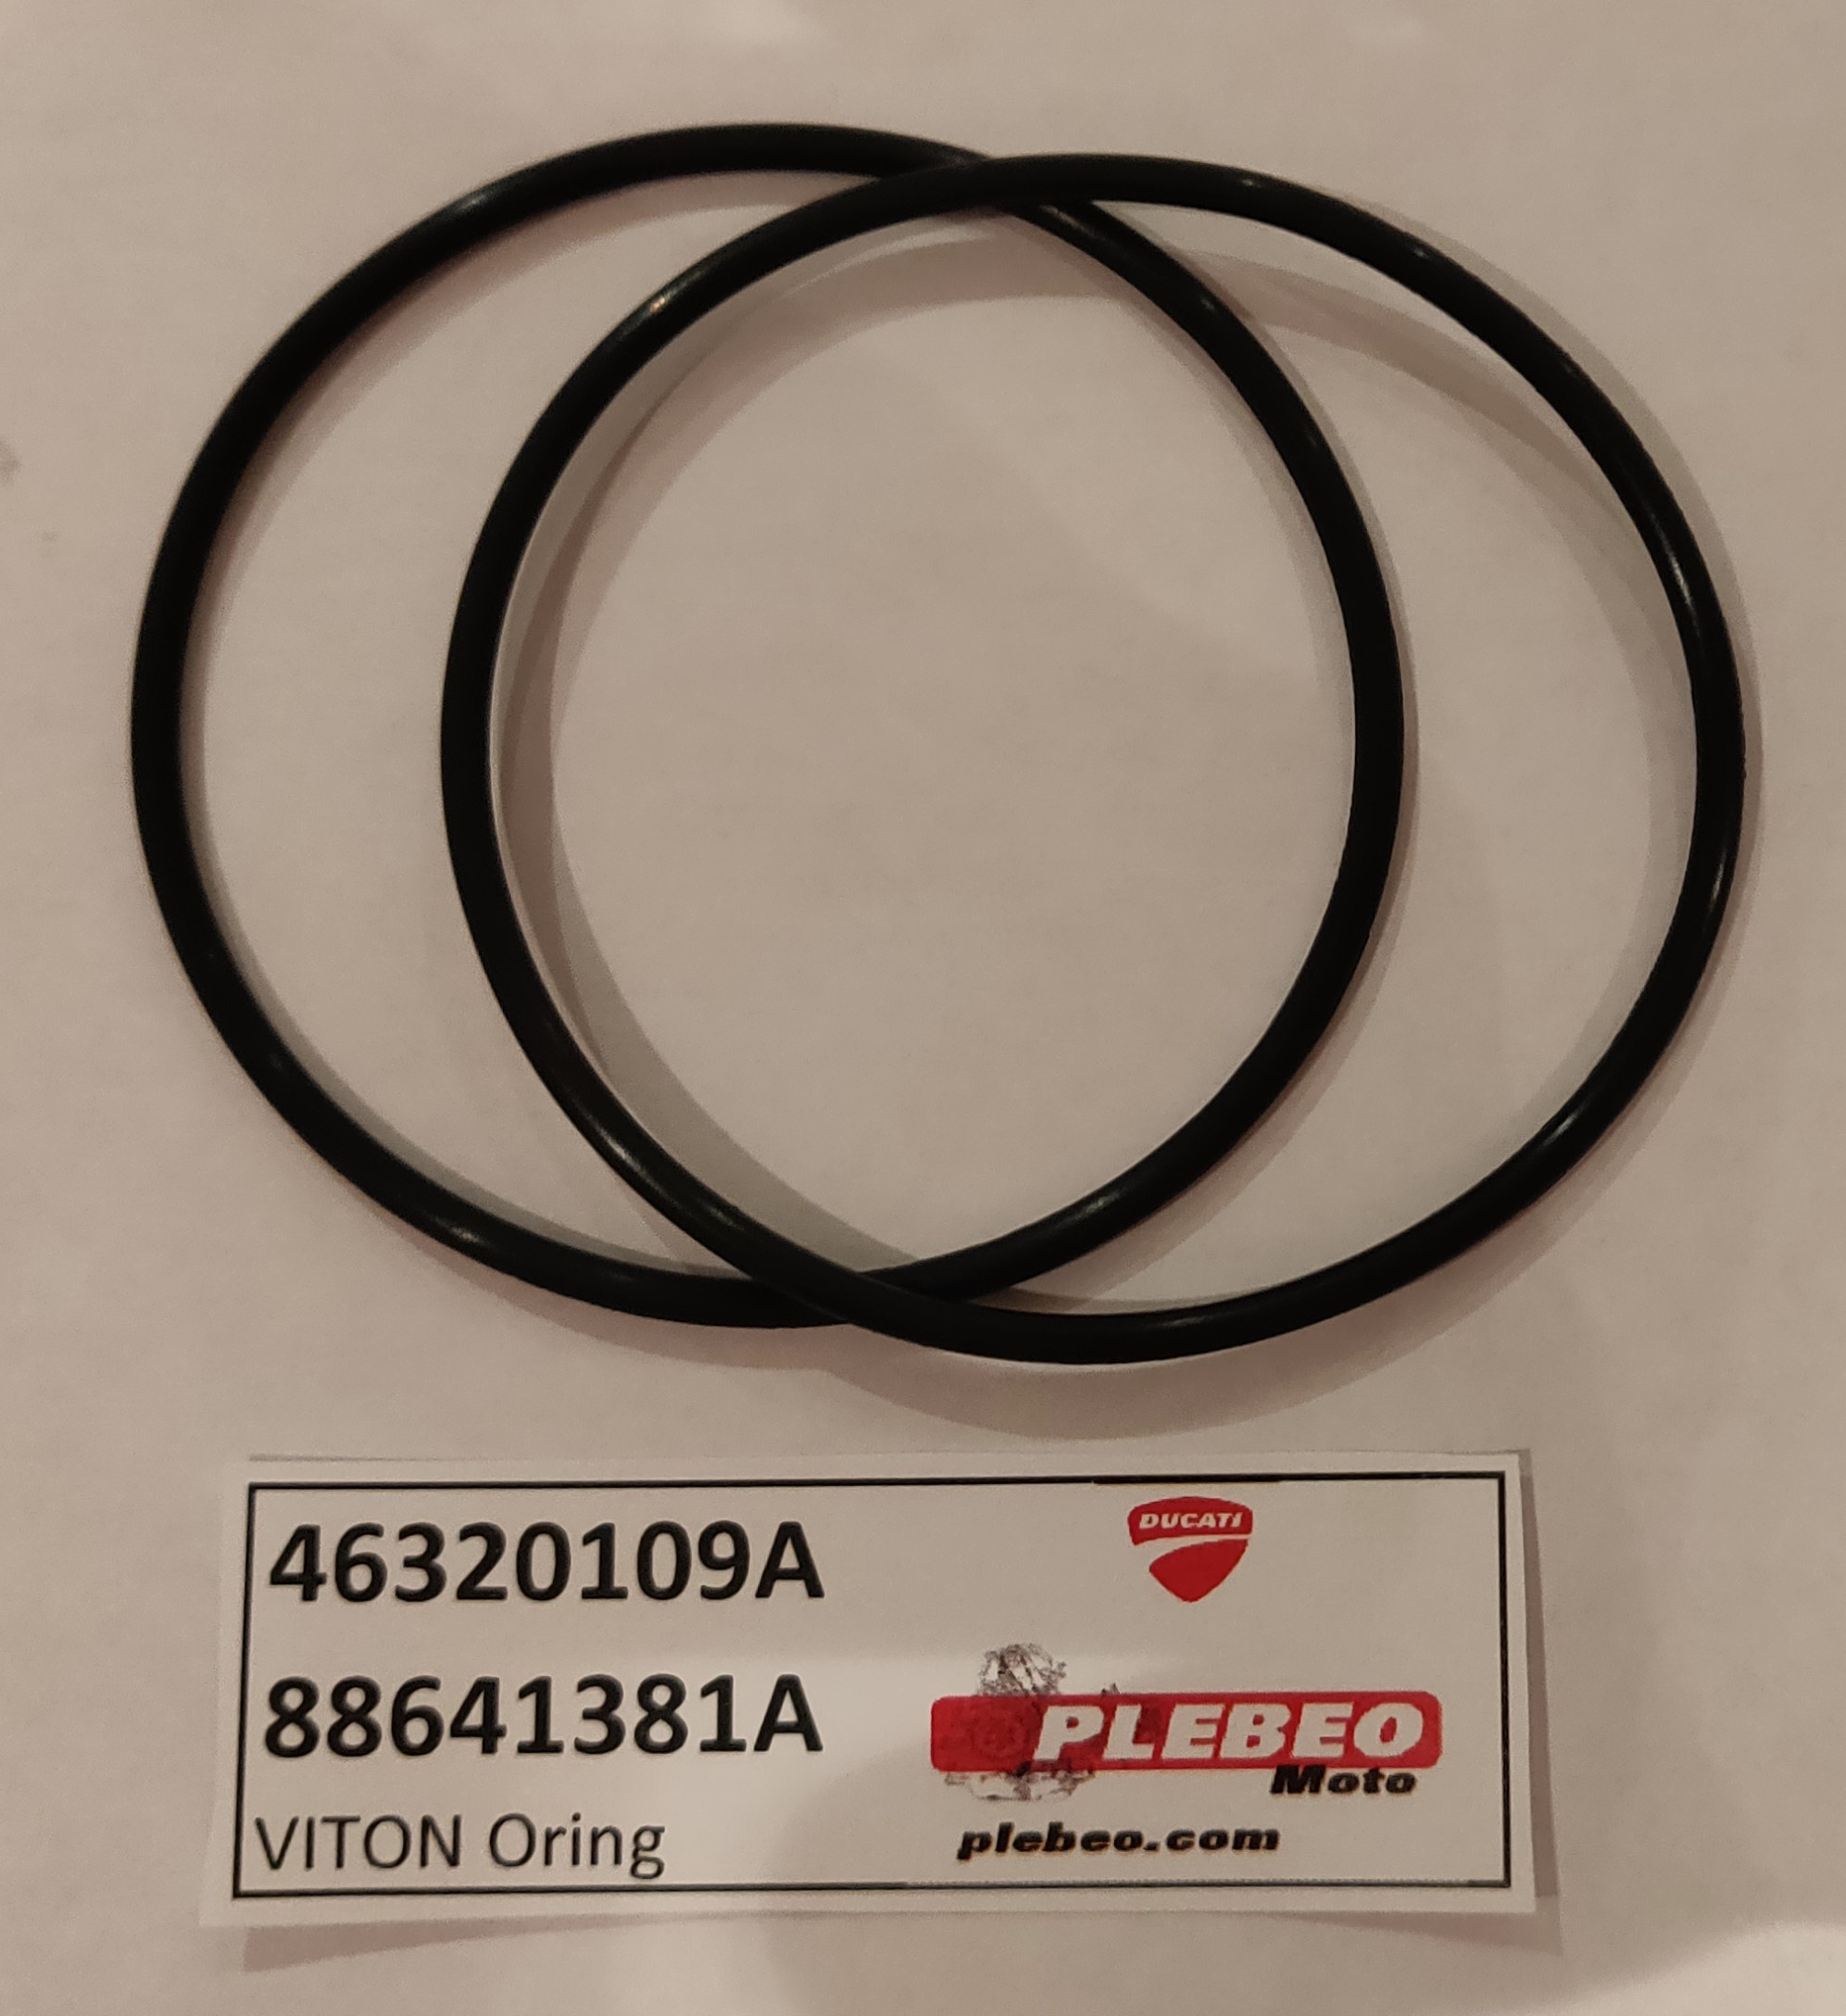 Ducati Cylinder O-Ring 2x kit HM MS Monster SC 46320109A 88641381A